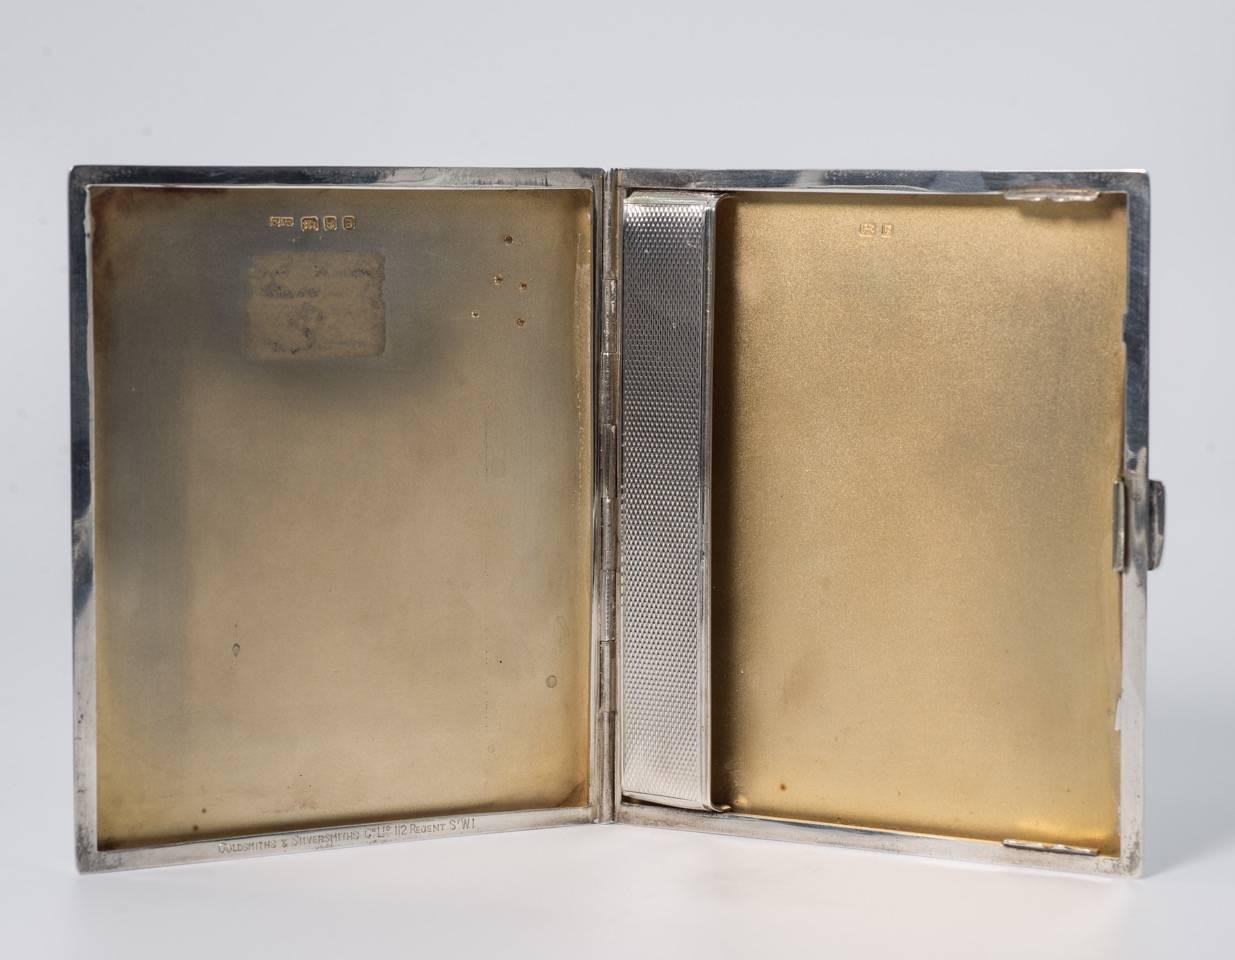 King George VI Coronation King's Monogram Silver Barley Pattern Presentation Box made by The Goldsmiths and Silversmiths Company Regent Street London to order by the Royal Household to be presented as a gift to VIPs attending the King on the